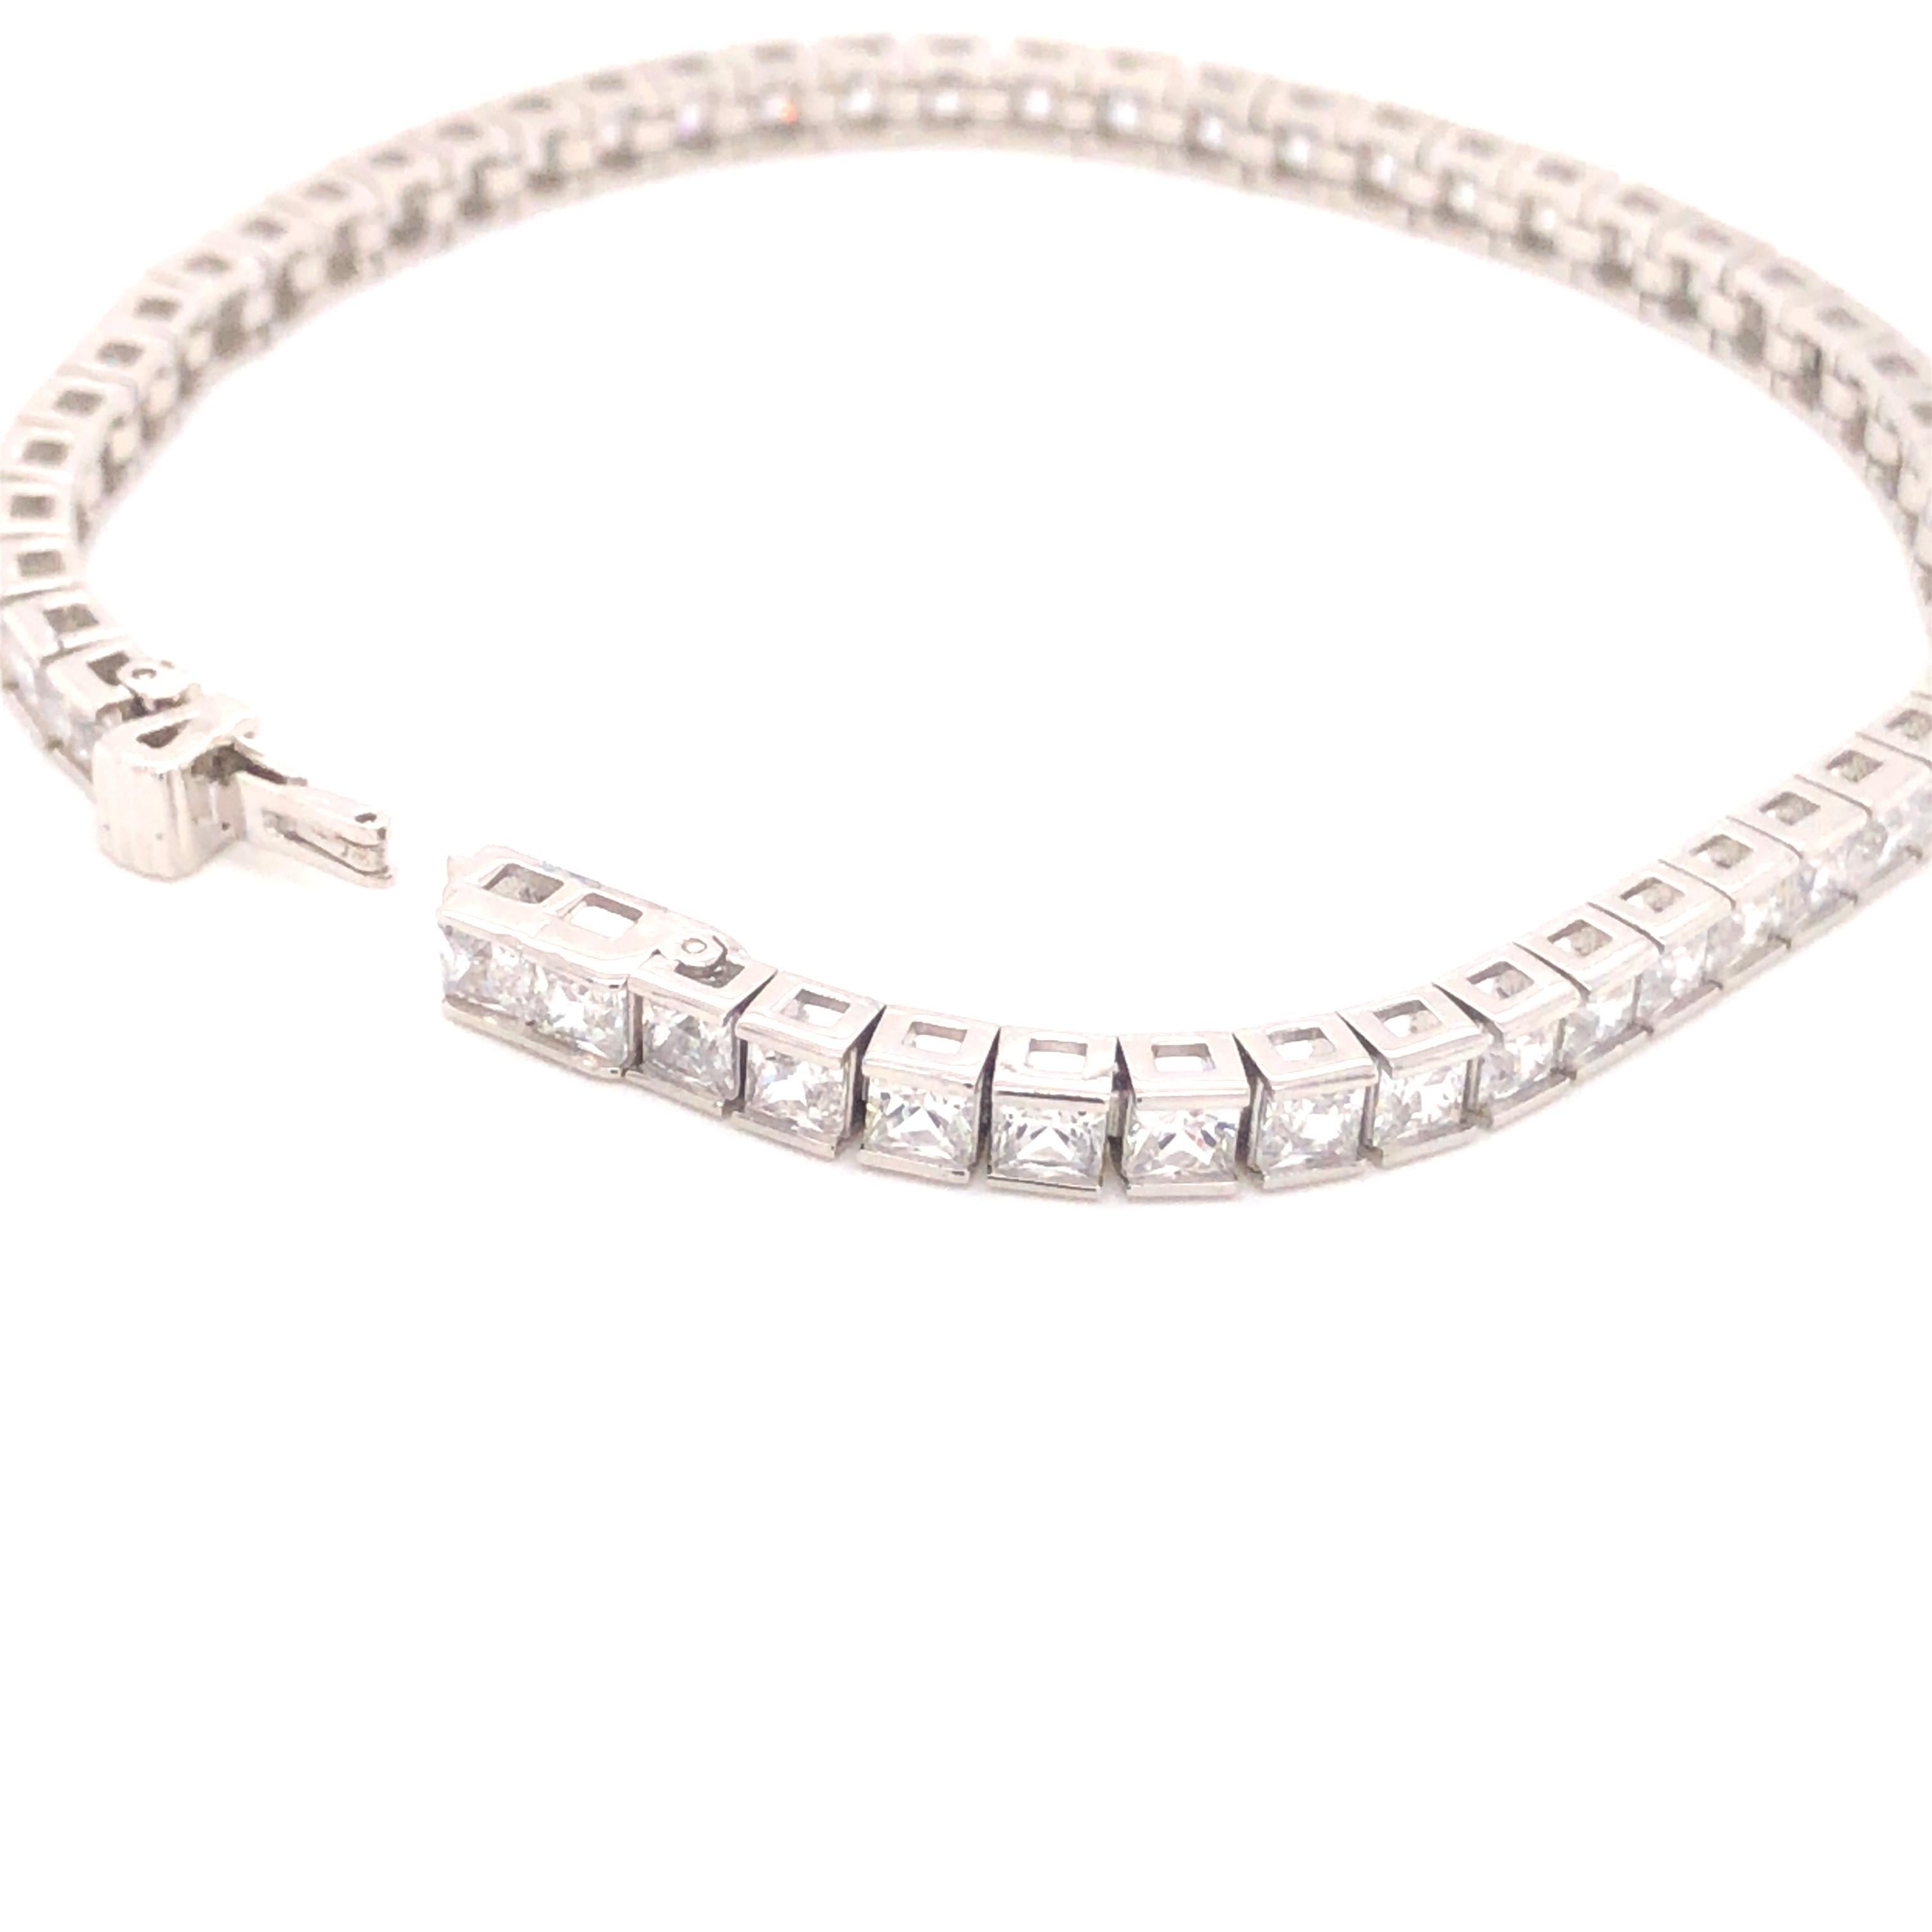 This fabulous tennis bracelet is embellished with 8.55ct of invisibly set sparkling princess cut cubic zirconia and is a real show stopper.

Conposed of 925 sterling silver with a polished platinum finish.

Dimensions 7.5 inches.

Whether you're